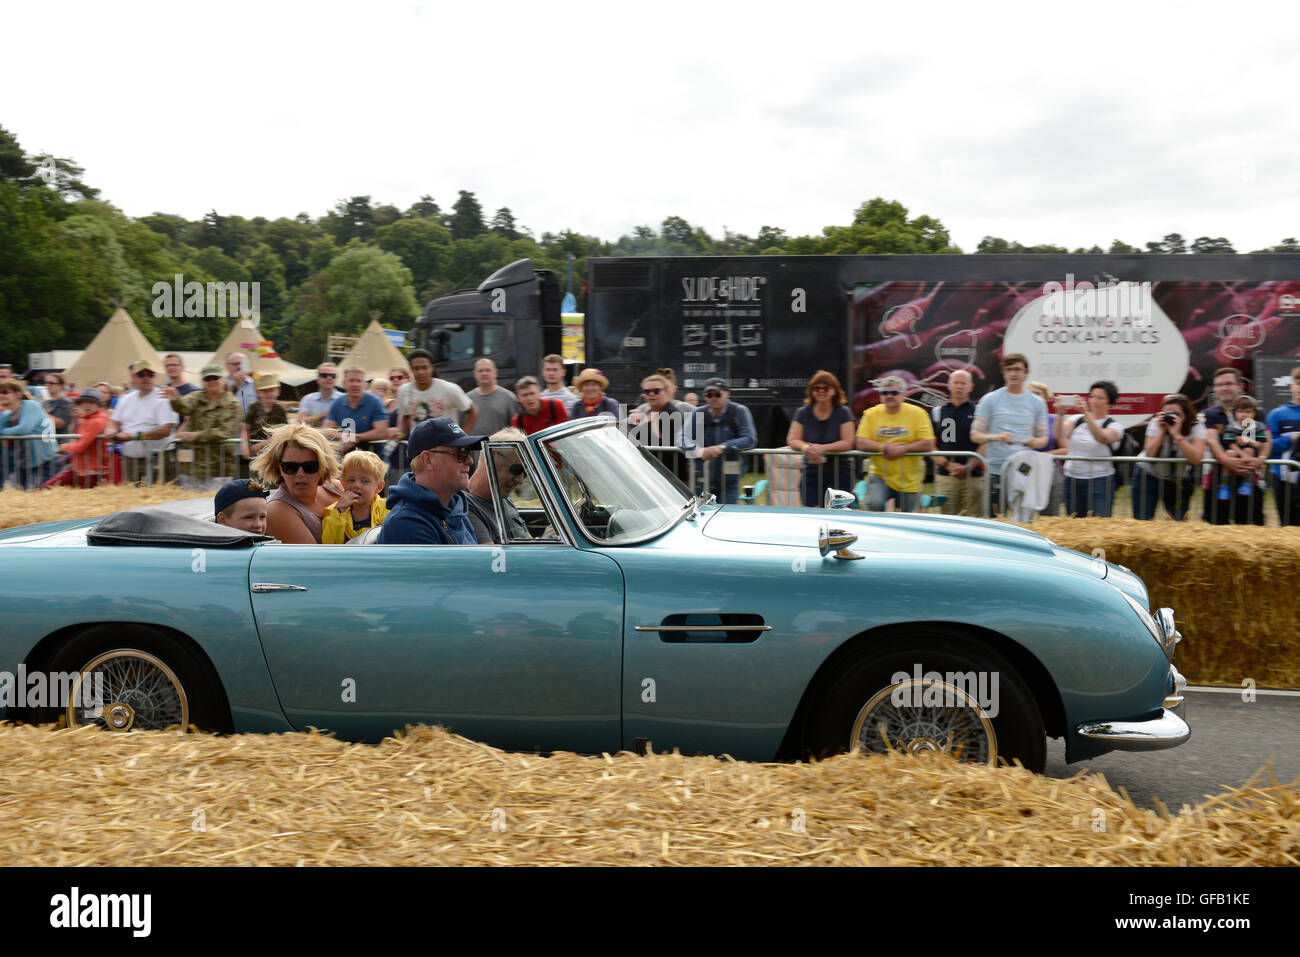 Carfest North, Bolesworth, Cheshire, UK. 31st July 2016. Chris Evans drives his 1964 convertible Aston Martin DB5 around the track. The event is the brainchild of Chris Evans and features 3 days of cars, music and entertainment with profits being donated to the charity Children in Need. Andrew Paterson/Alamy Live News Stock Photo